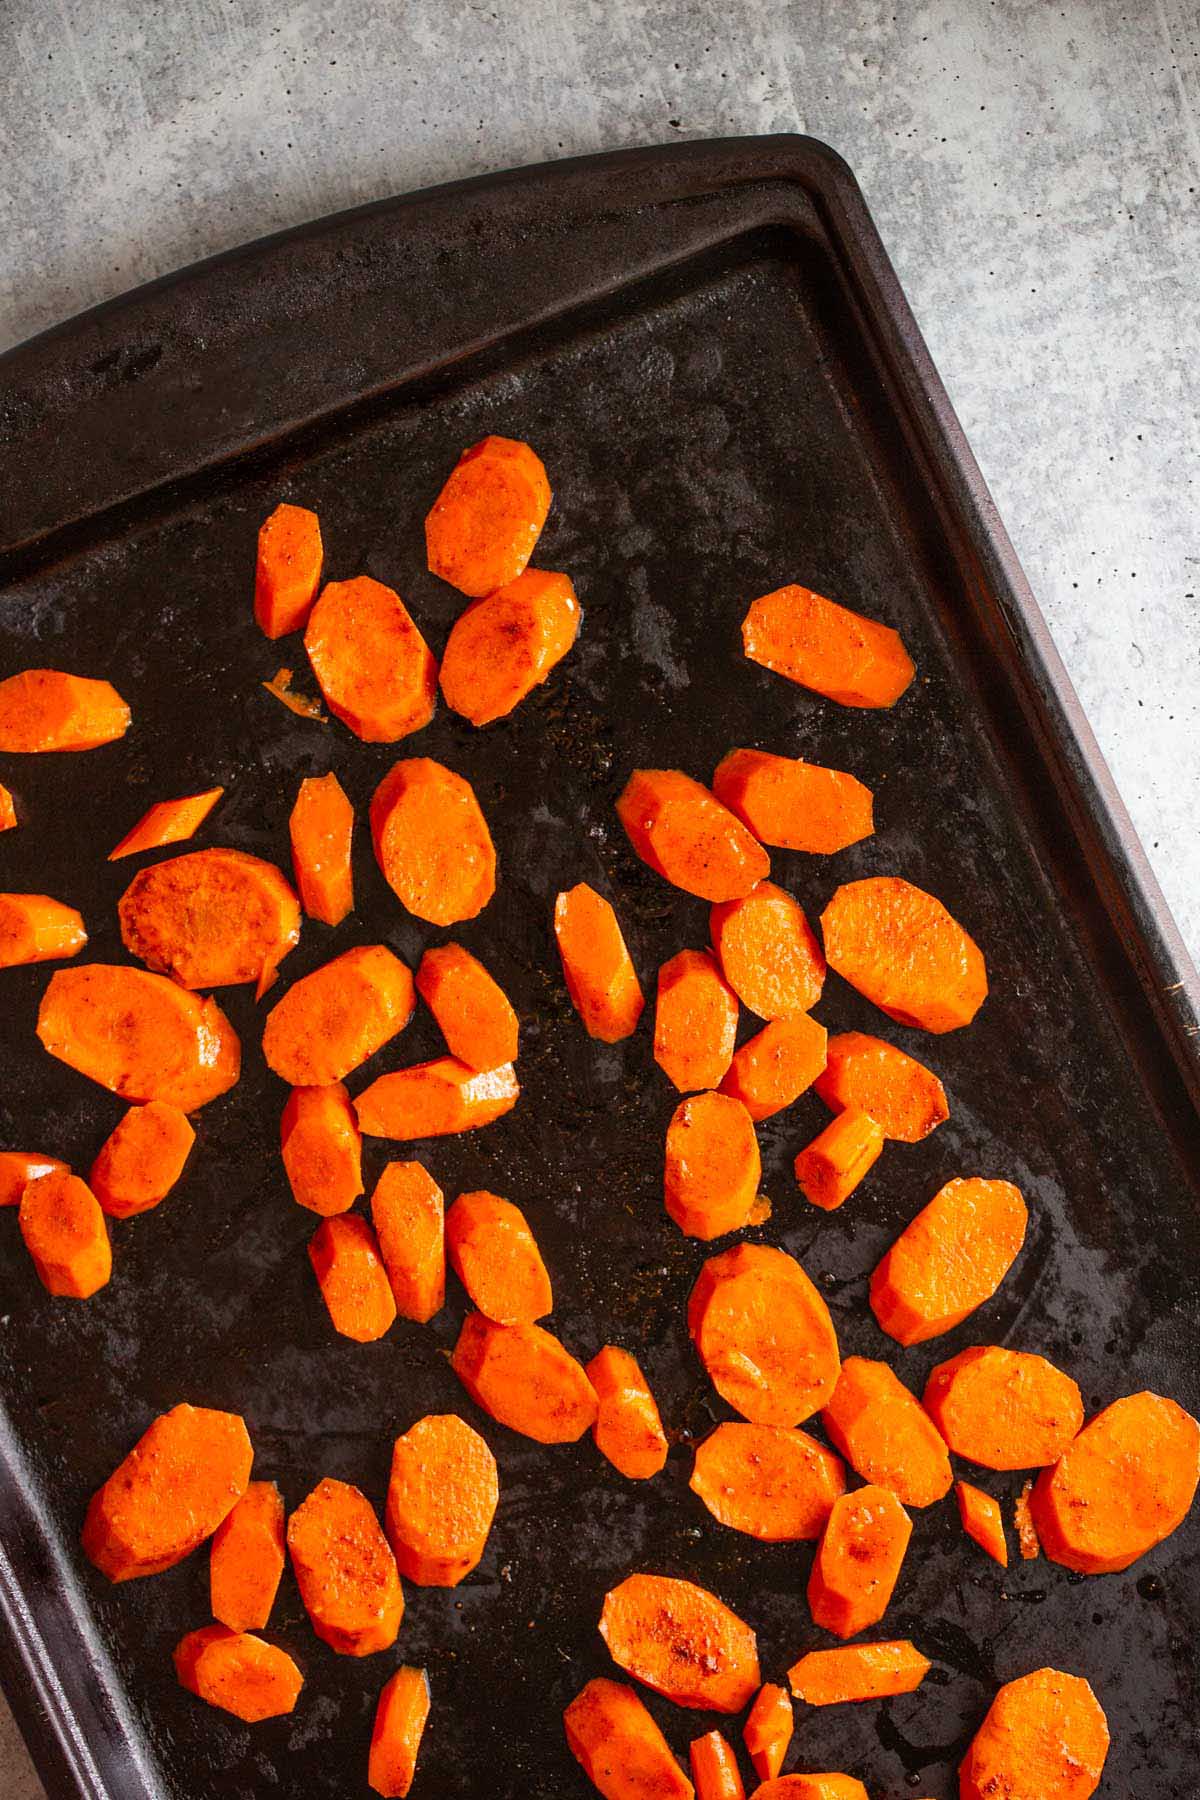 Raw carrot slices on a sheet pan.